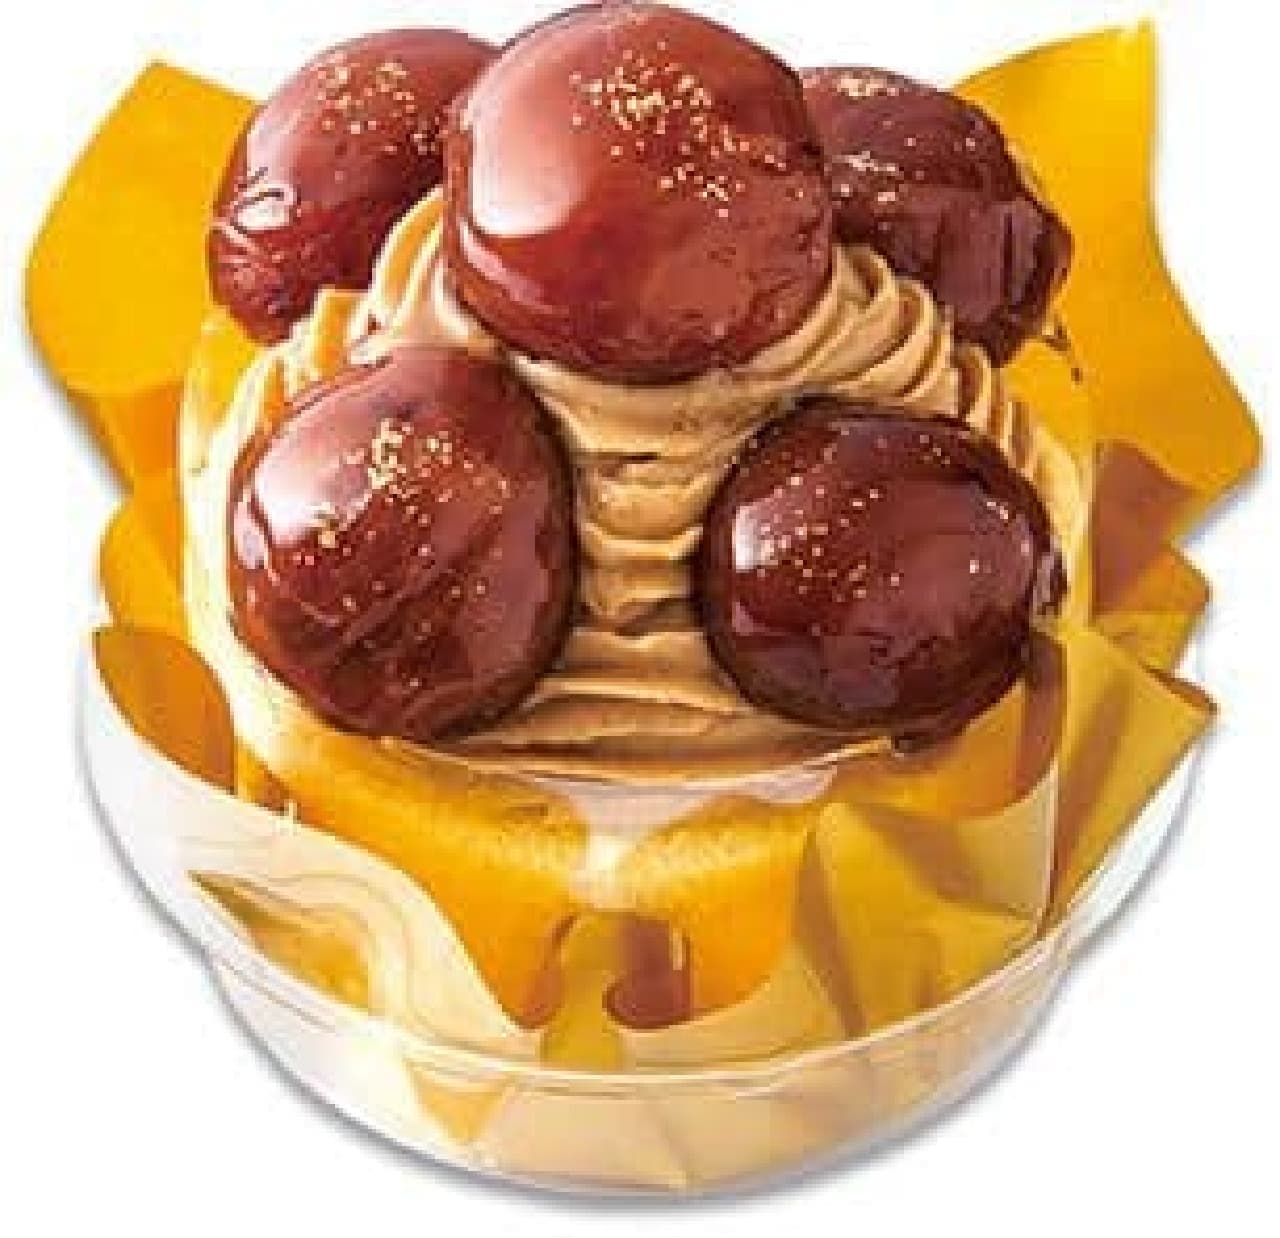 Fujiya pastry shop "Mont Blanc with chestnuts"